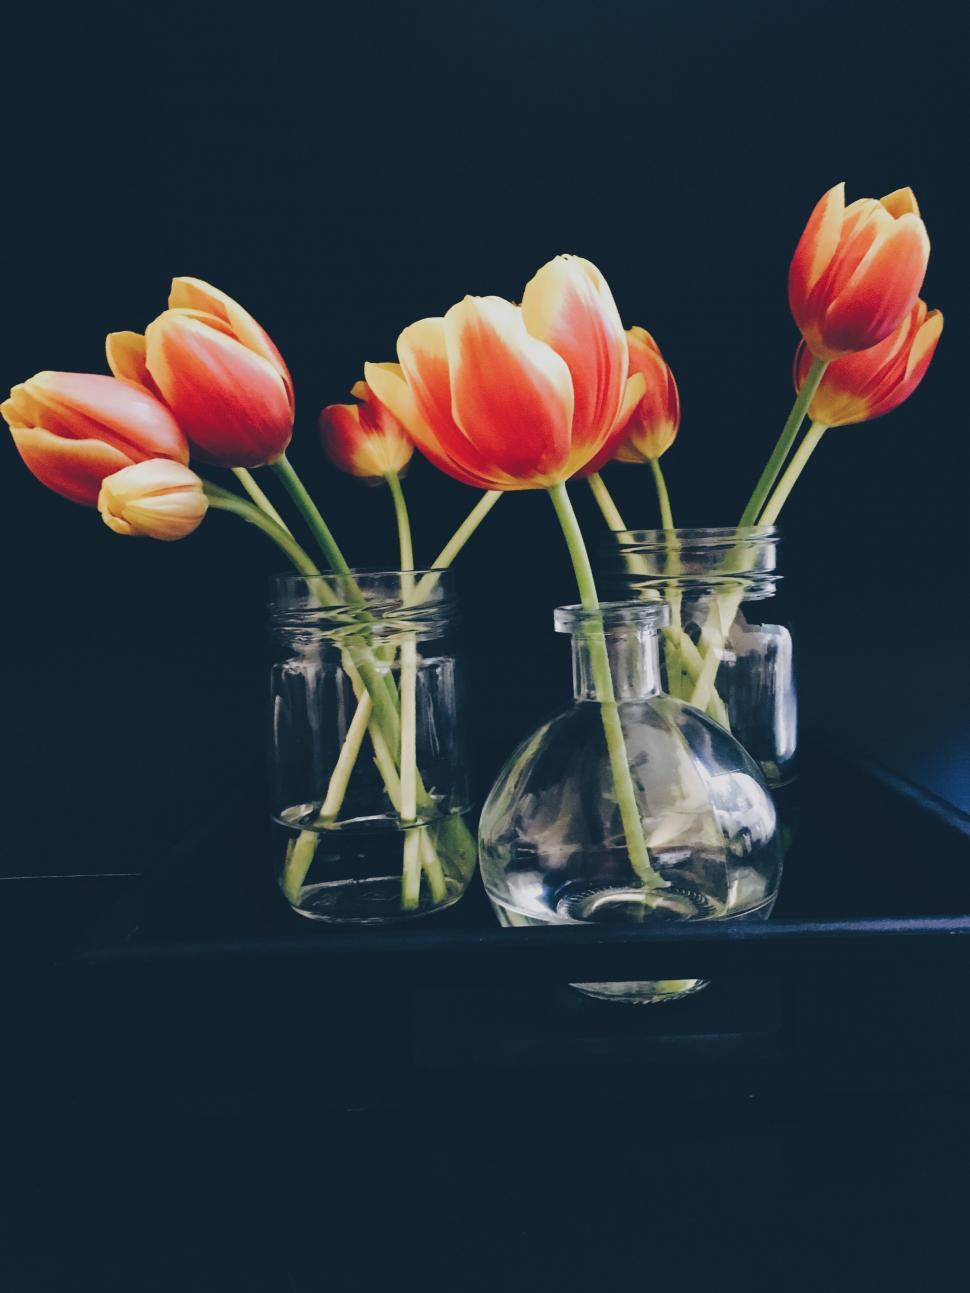 Free Image of Red Yellow Tulips  